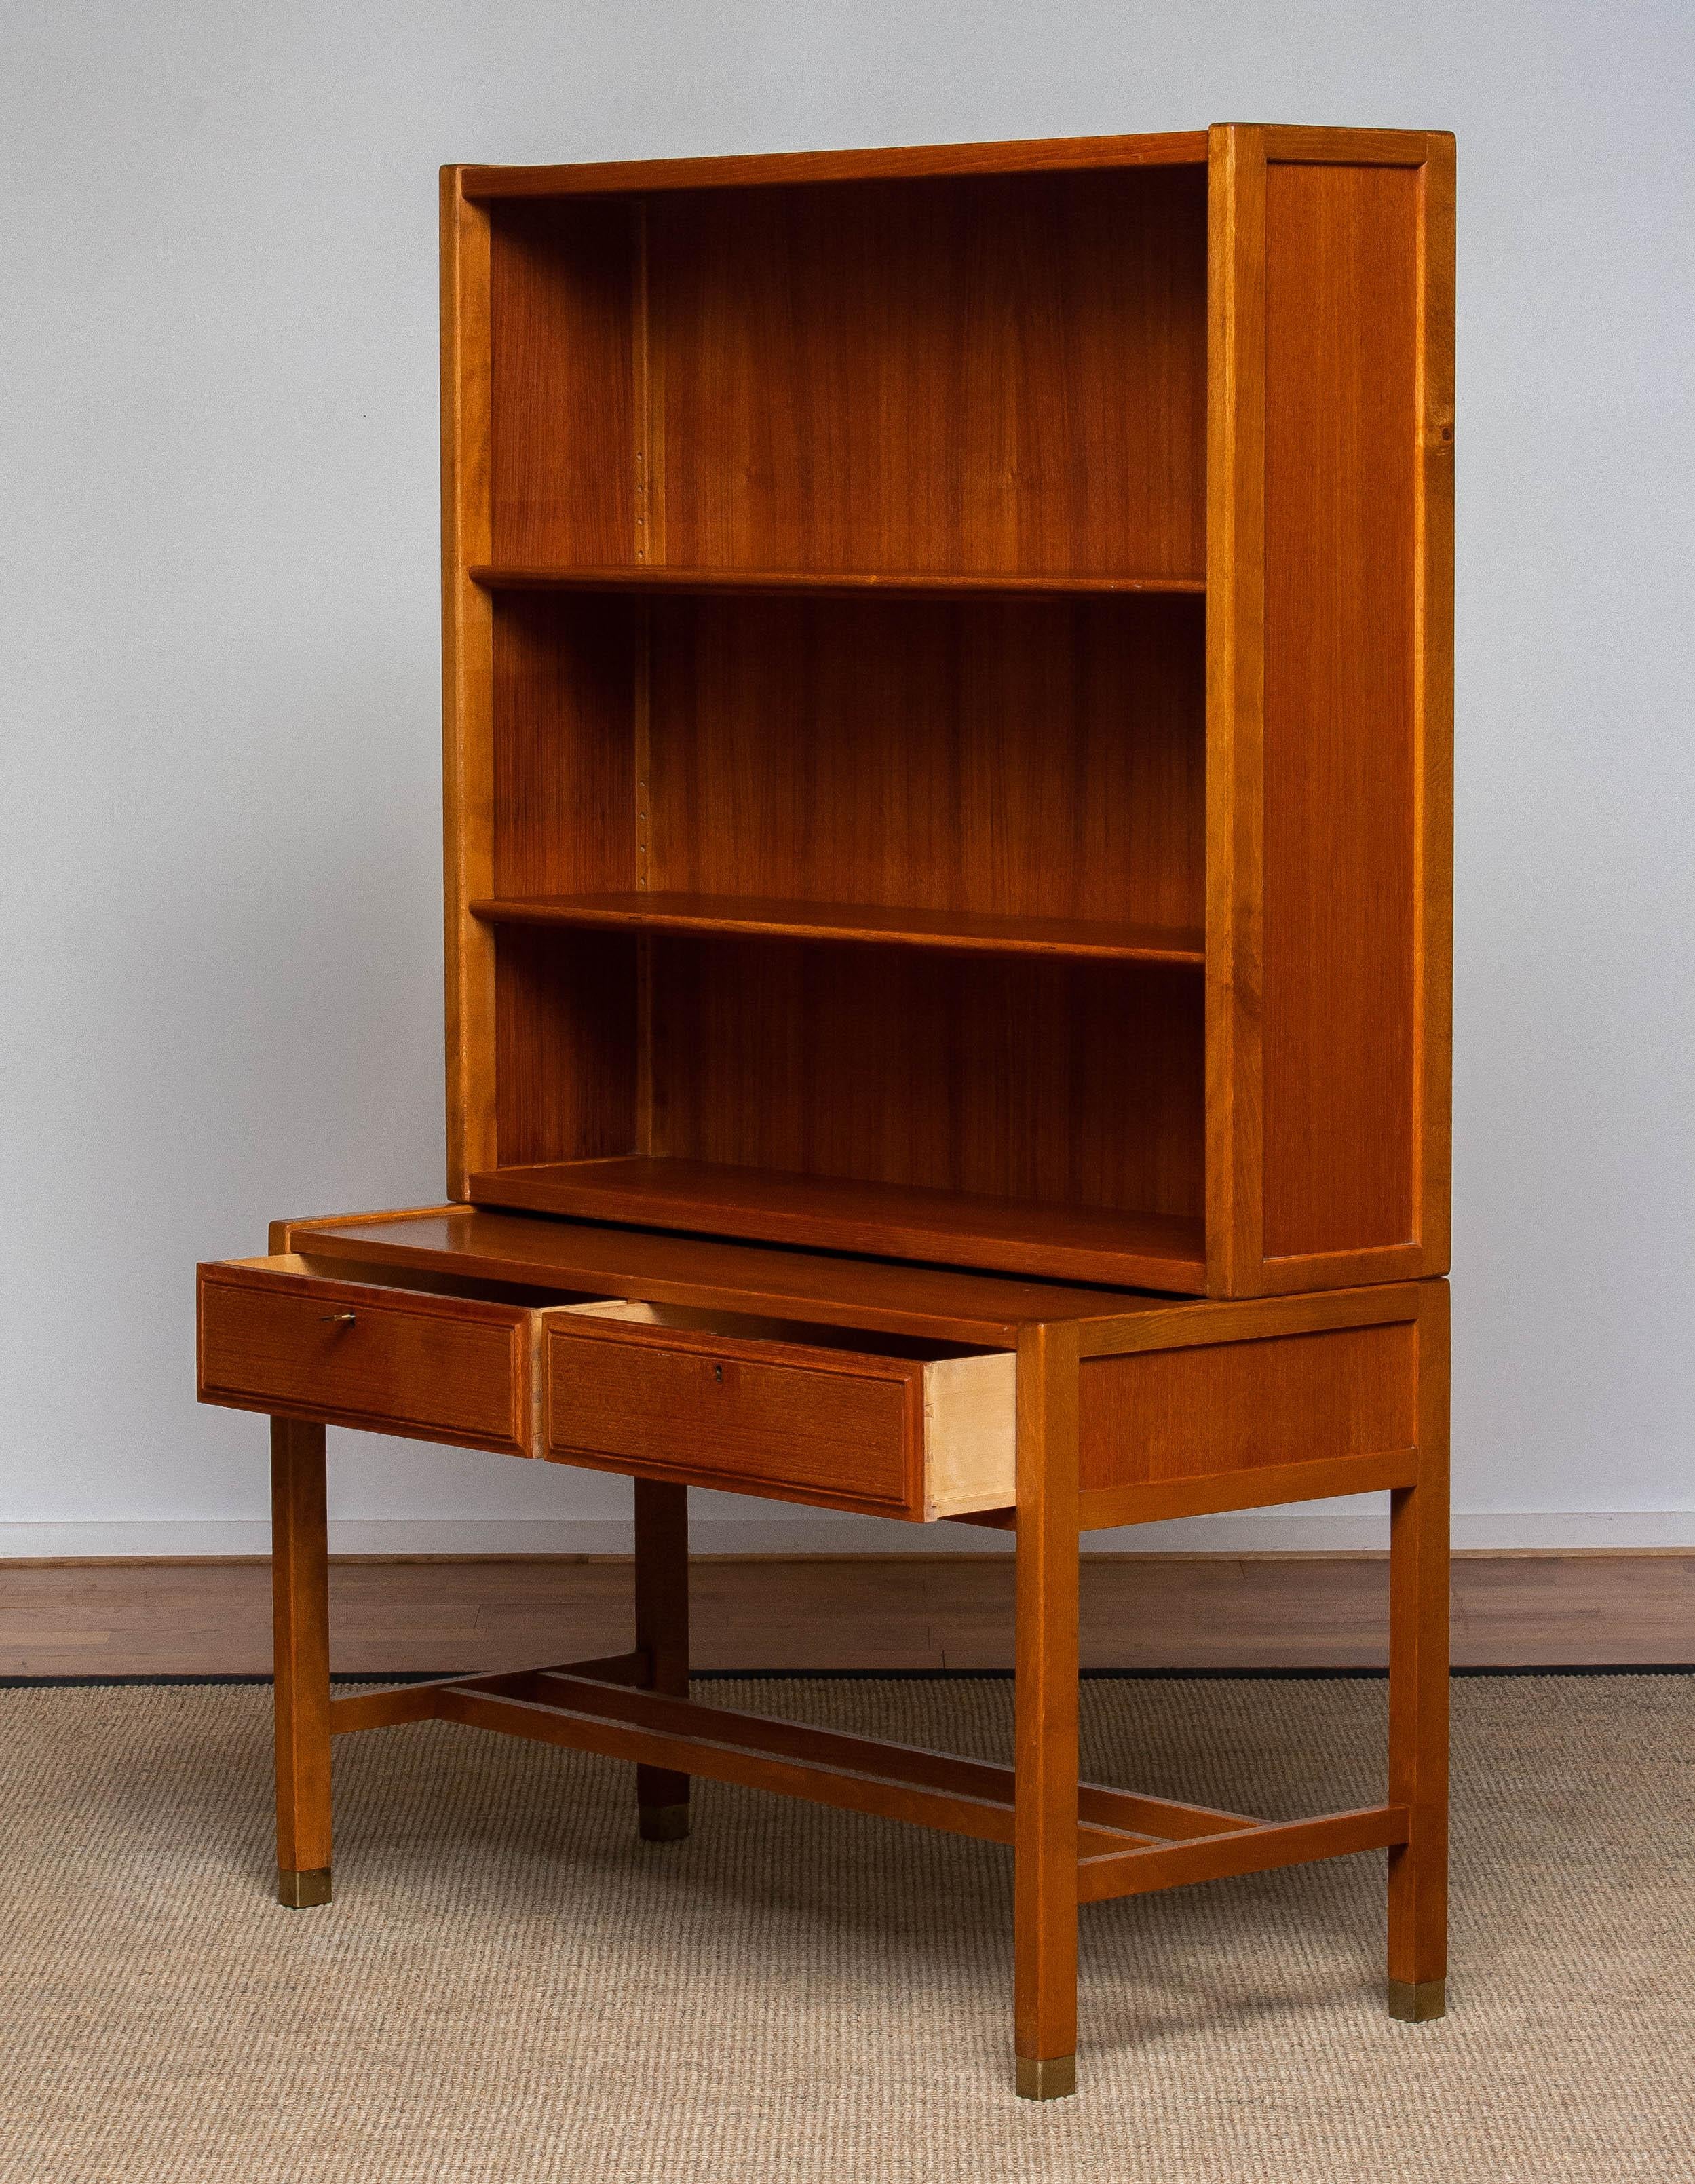 Mid-20th Century 1960s Teak Drawer and Shelfs Cabinet by Carl Axel Acking for Bodafors, Sweden For Sale